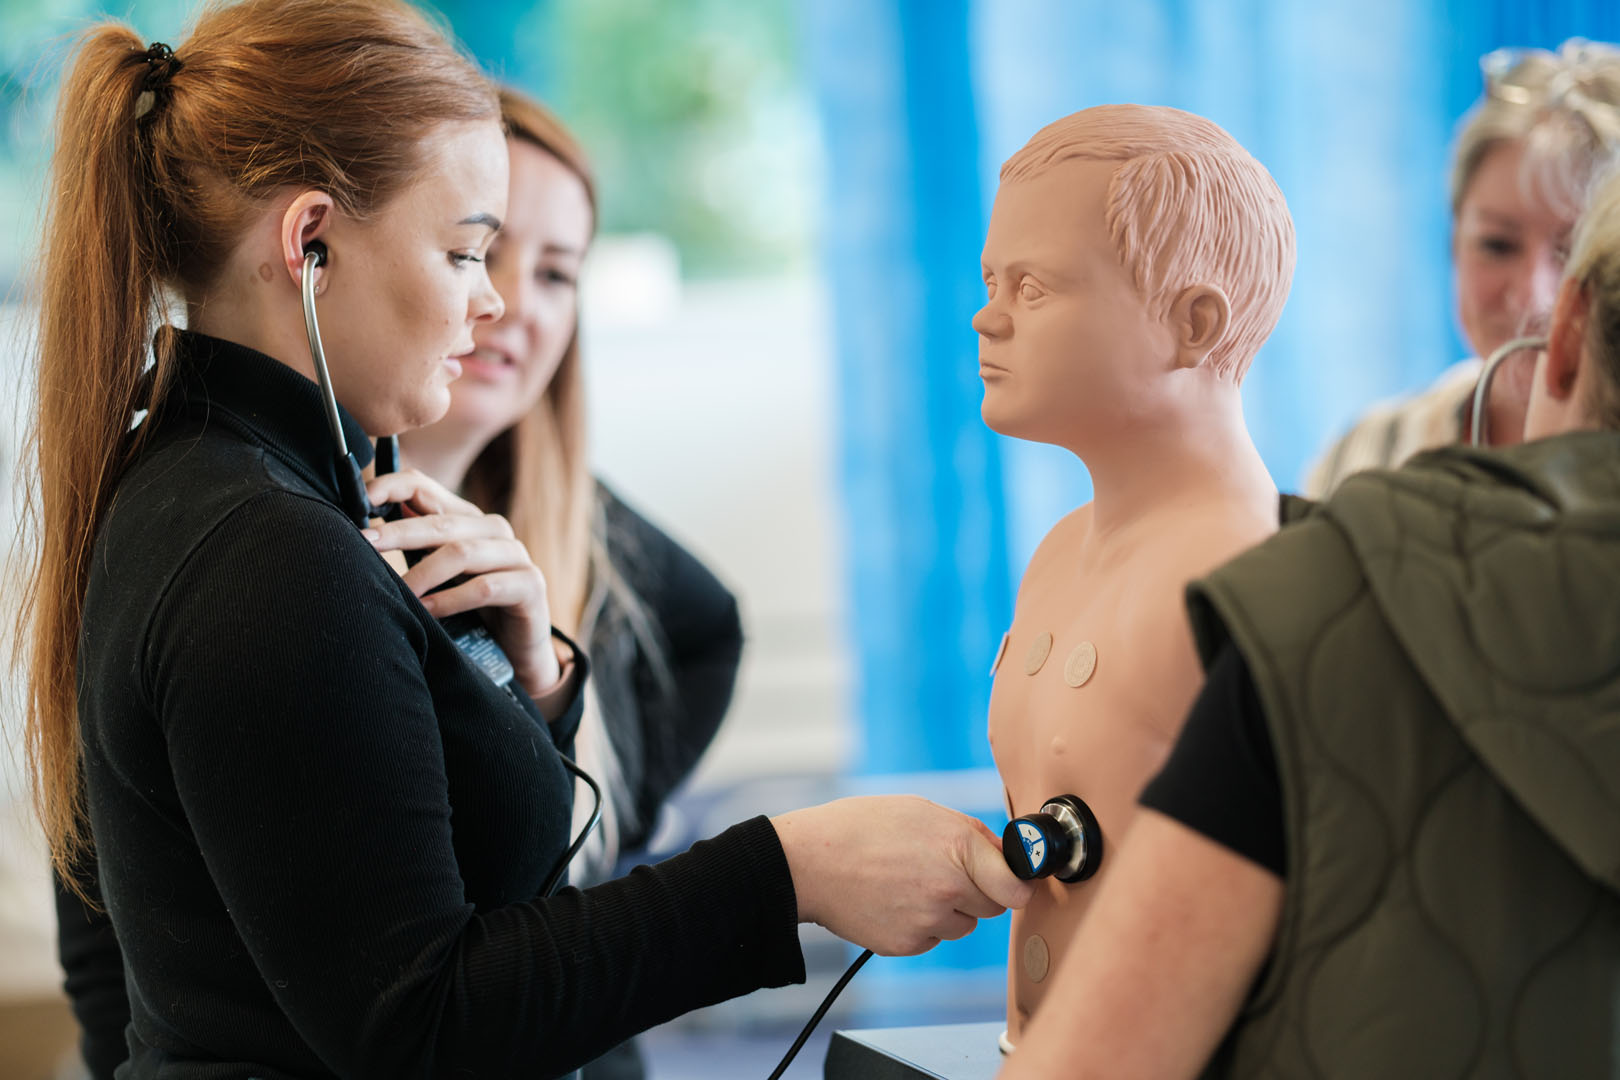 Students monitoring a dummy using stethoscope equipment